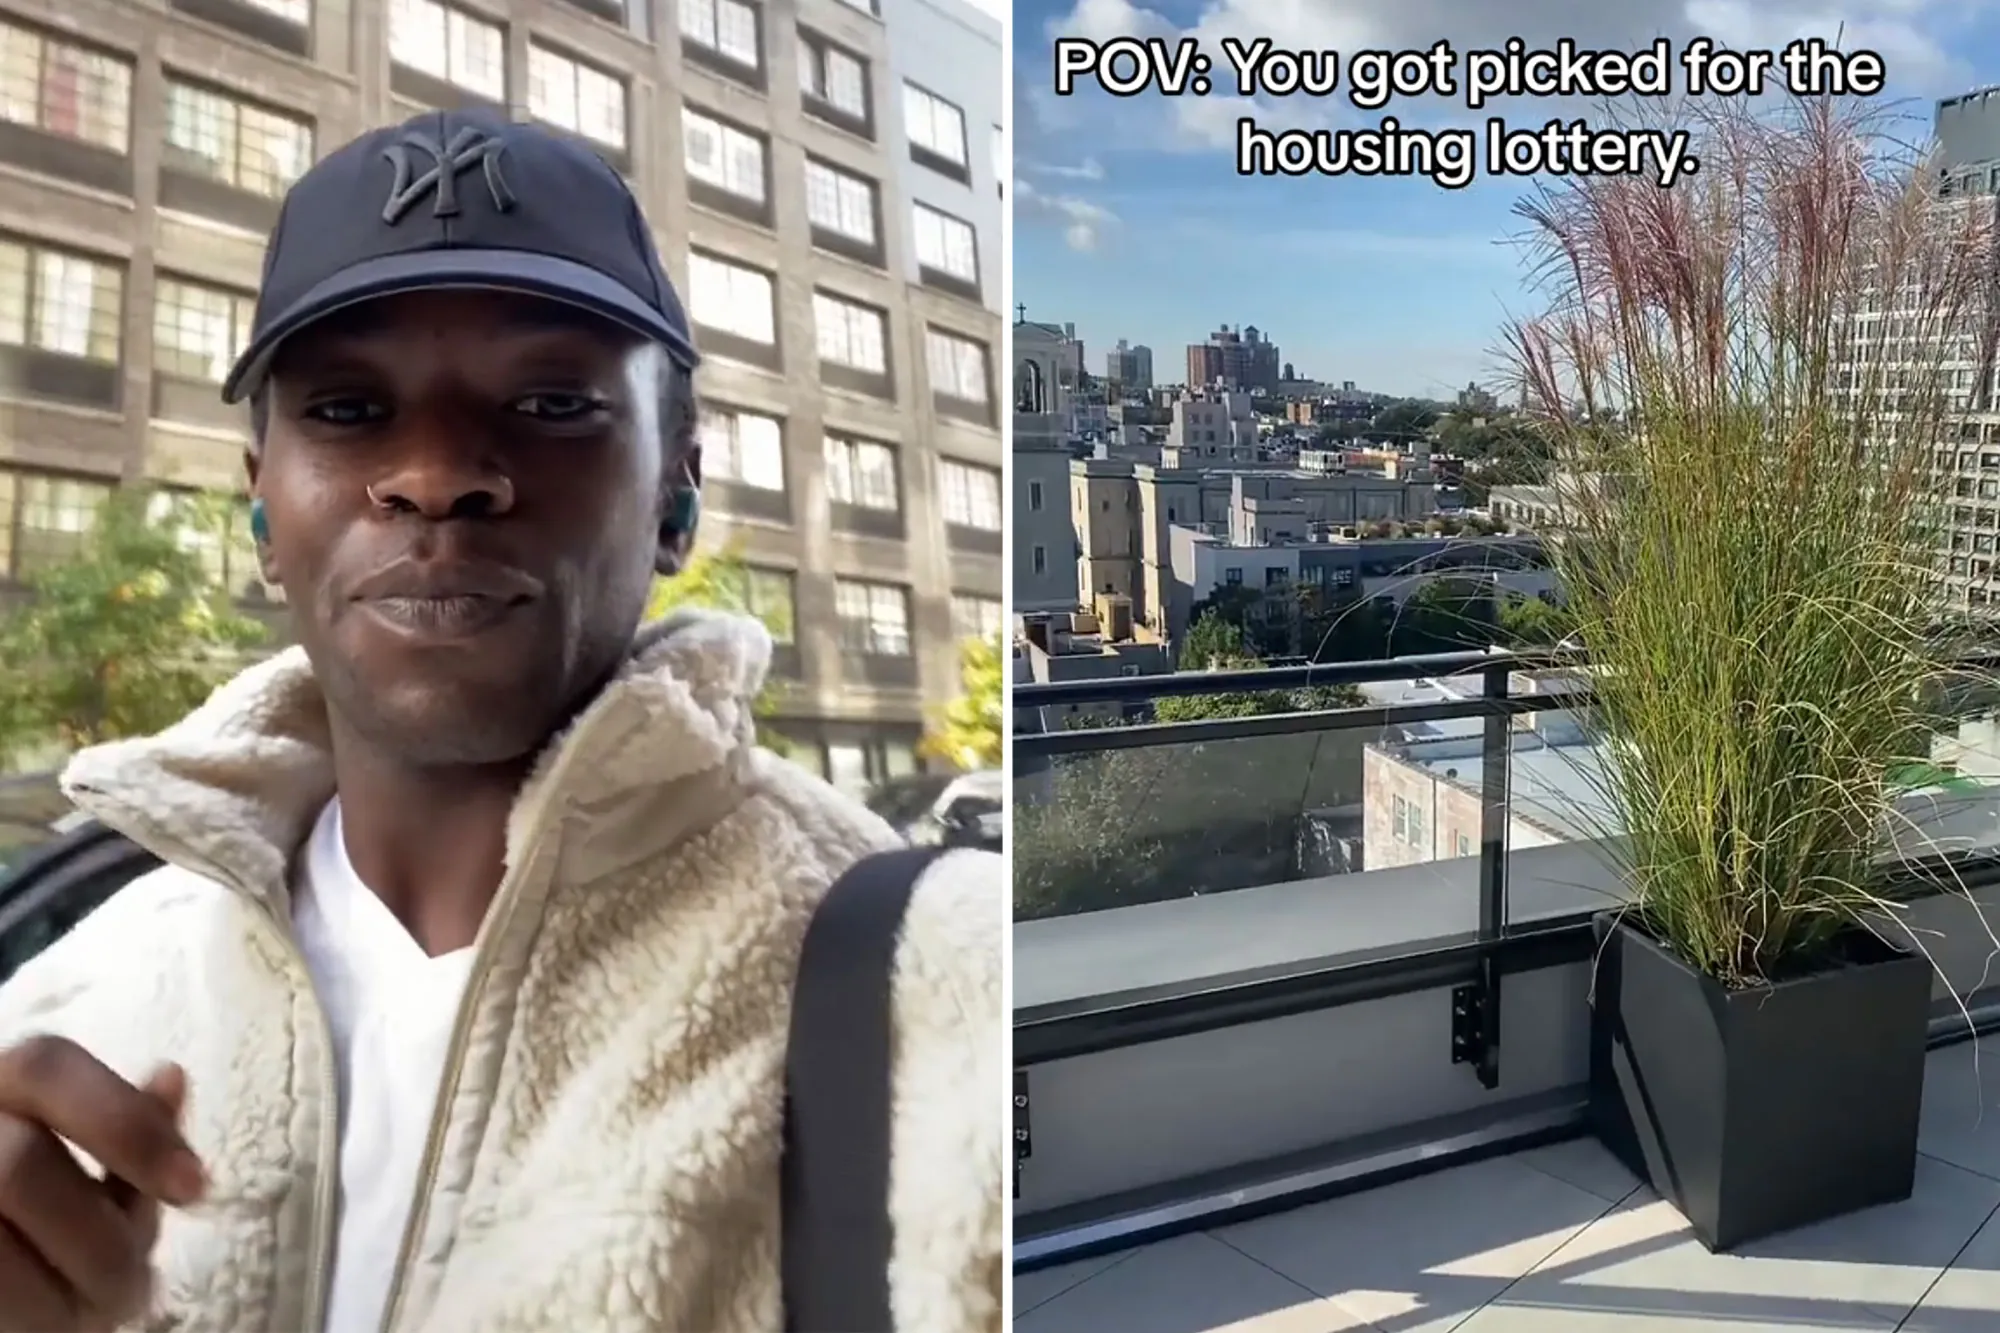 Man shows off new Brooklyn apartment he won through housing lottery - complete with rooftop views, game room